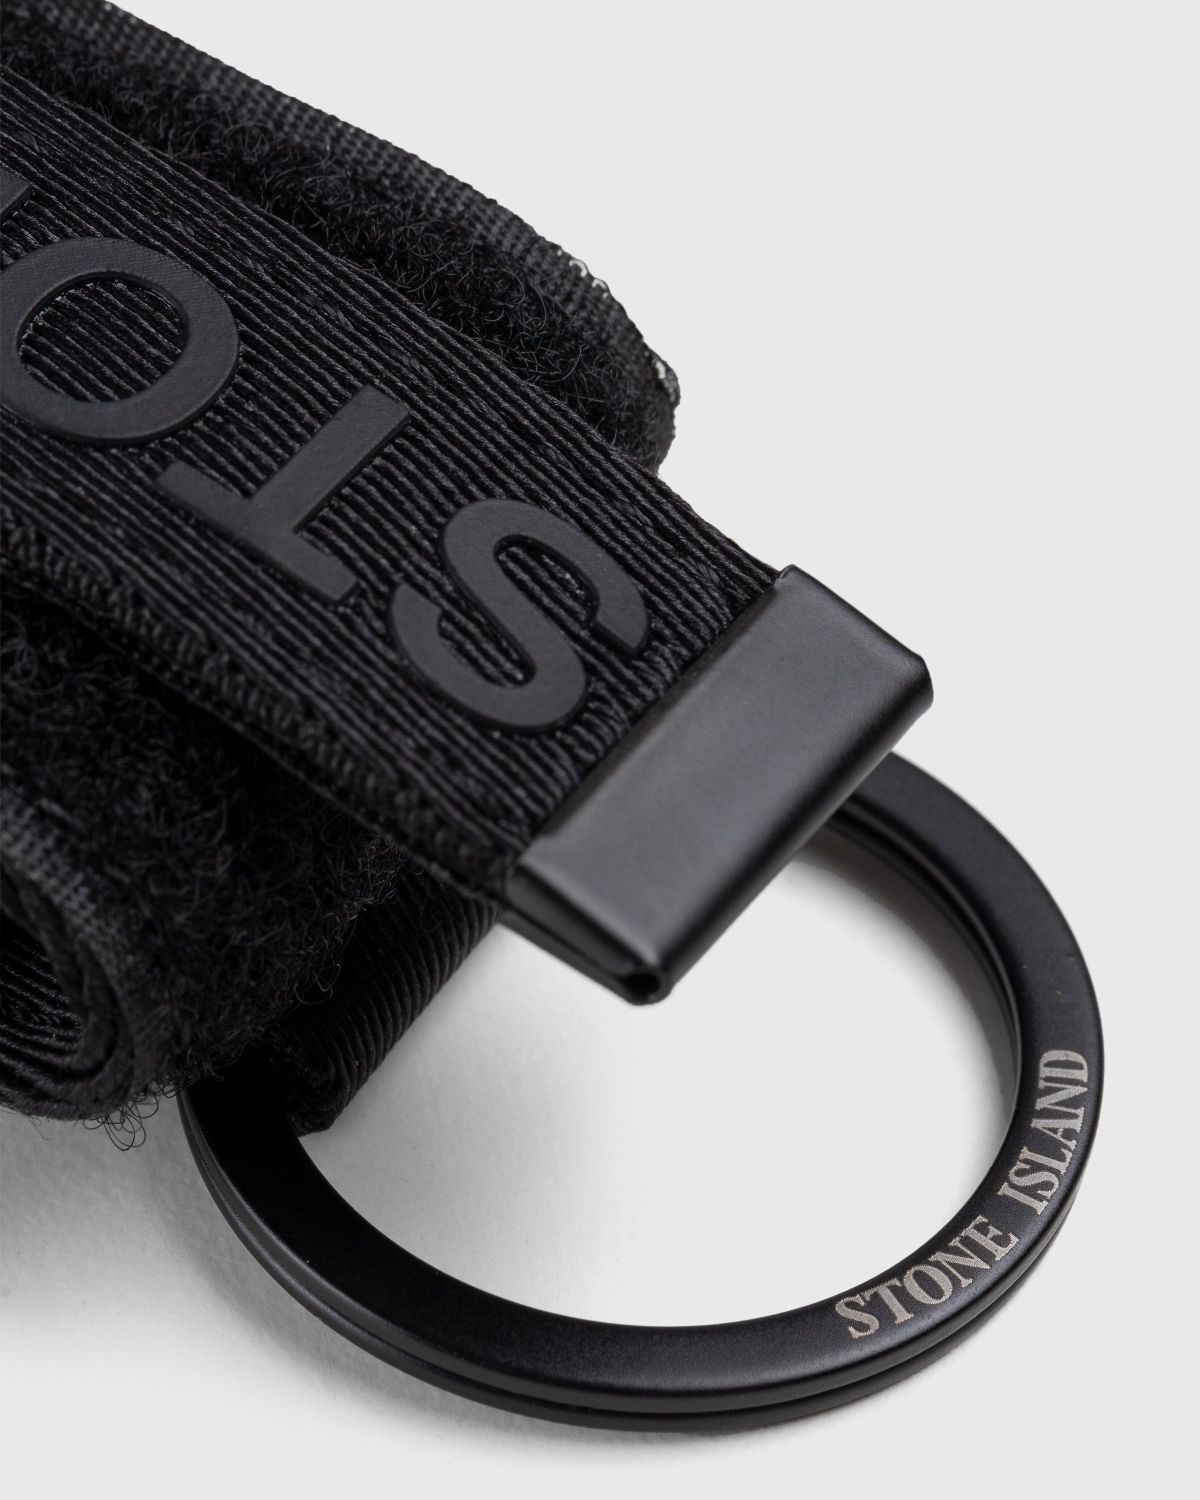 Stone Island – AirPods Case With Key Holder Black - Phone cases - Black - Image 5